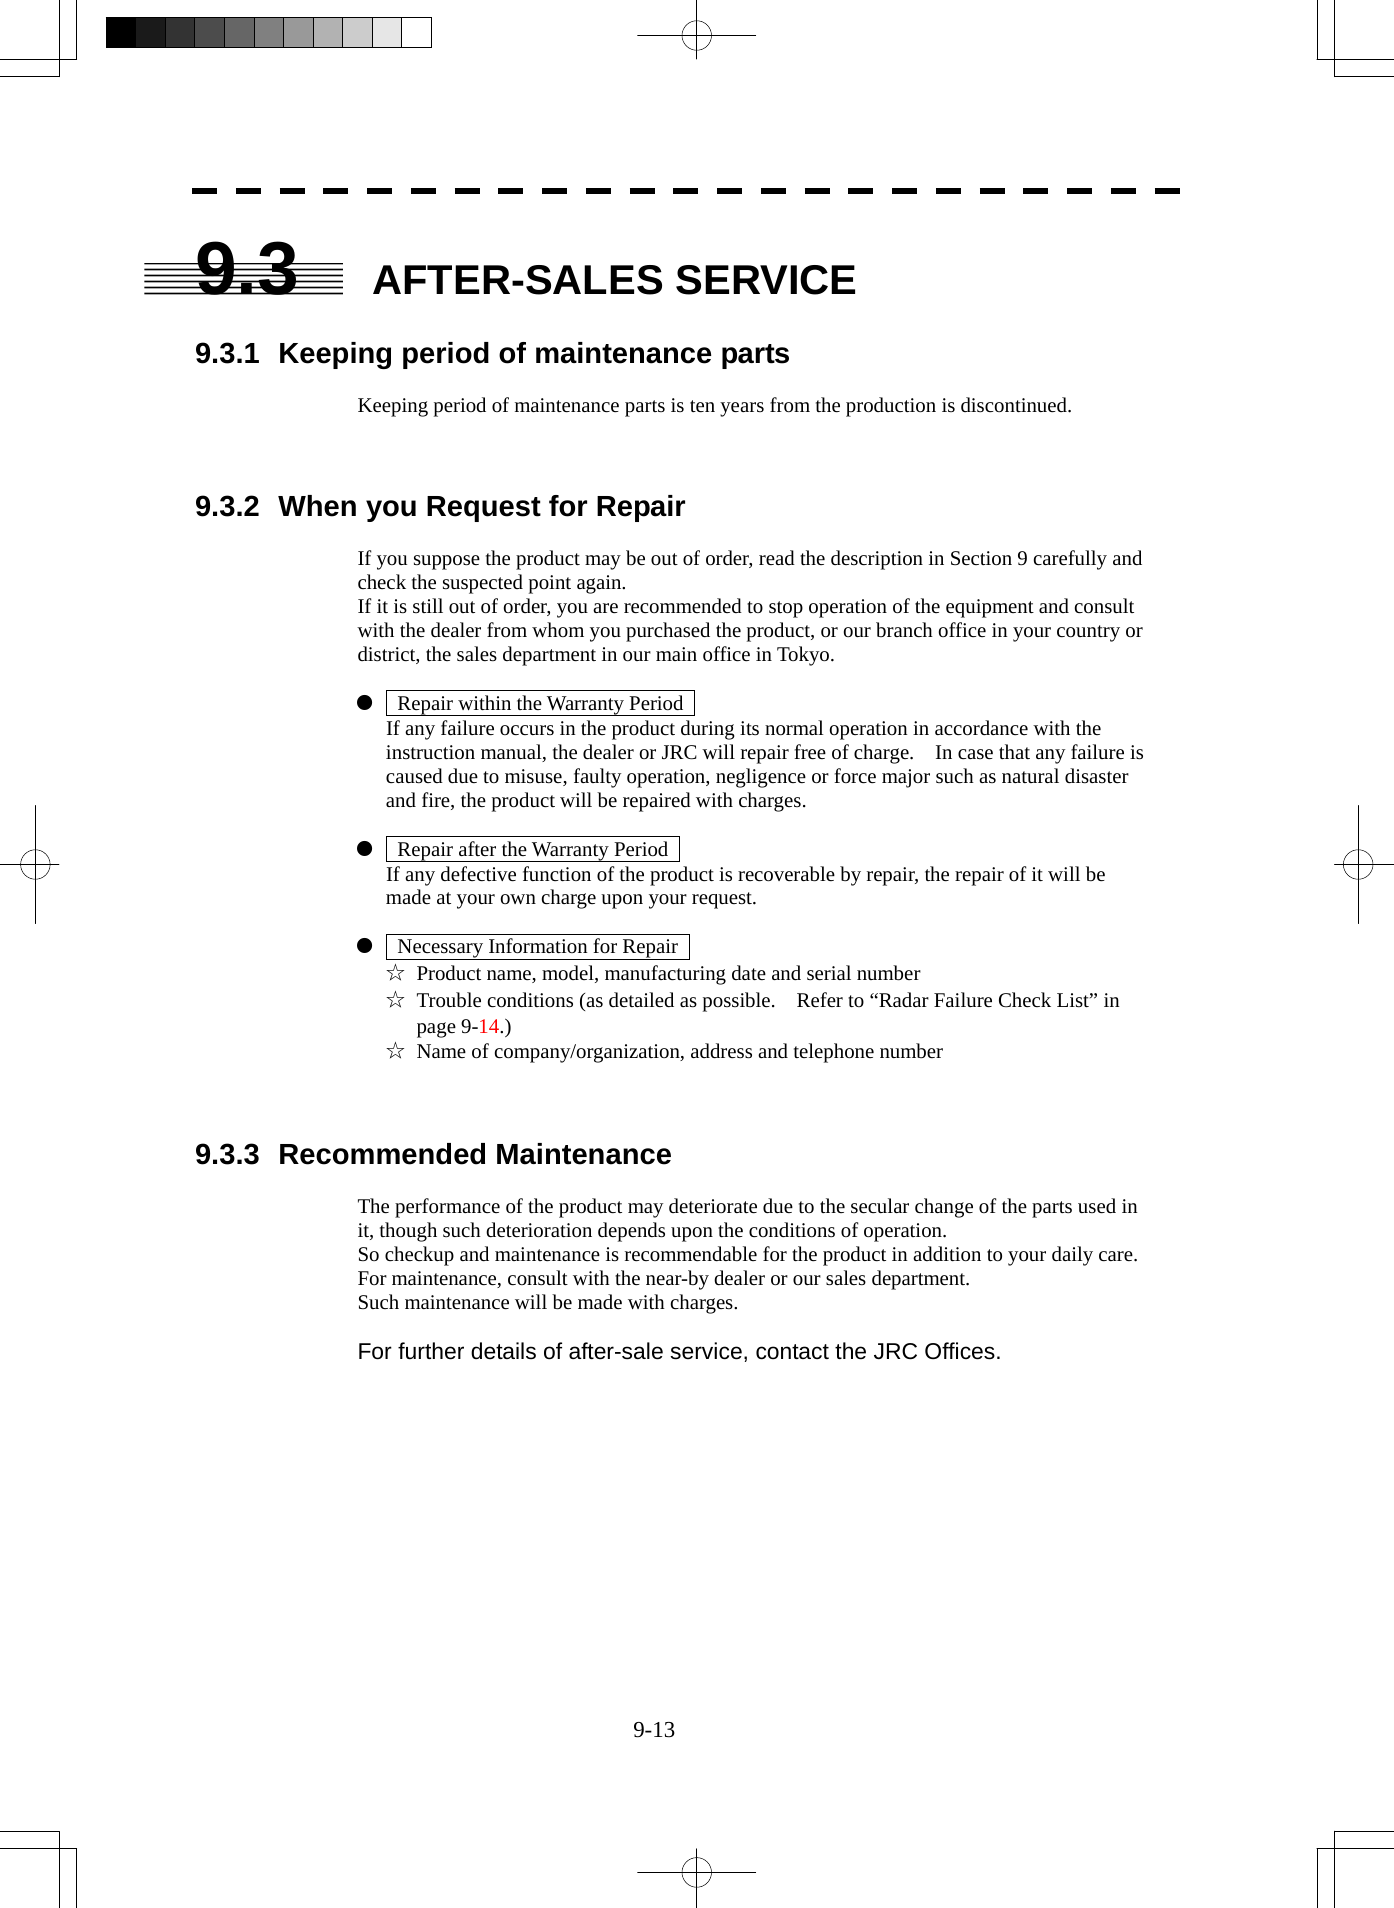  9-13 9.3 AFTER-SALES SERVICE  9.3.1  Keeping period of maintenance parts  Keeping period of maintenance parts is ten years from the production is discontinued.    9.3.2  When you Request for Repair  If you suppose the product may be out of order, read the description in Section 9 carefully and check the suspected point again. If it is still out of order, you are recommended to stop operation of the equipment and consult with the dealer from whom you purchased the product, or our branch office in your country or district, the sales department in our main office in Tokyo.  z    Repair within the Warranty Period     If any failure occurs in the product during its normal operation in accordance with the instruction manual, the dealer or JRC will repair free of charge.    In case that any failure is caused due to misuse, faulty operation, negligence or force major such as natural disaster and fire, the product will be repaired with charges.  z    Repair after the Warranty Period     If any defective function of the product is recoverable by repair, the repair of it will be made at your own charge upon your request.  z    Necessary Information for Repair   ☆  Product name, model, manufacturing date and serial number ☆  Trouble conditions (as detailed as possible.    Refer to “Radar Failure Check List” in page 9-14.) ☆  Name of company/organization, address and telephone number    9.3.3 Recommended Maintenance  The performance of the product may deteriorate due to the secular change of the parts used in it, though such deterioration depends upon the conditions of operation. So checkup and maintenance is recommendable for the product in addition to your daily care. For maintenance, consult with the near-by dealer or our sales department. Such maintenance will be made with charges.  For further details of after-sale service, contact the JRC Offices. 